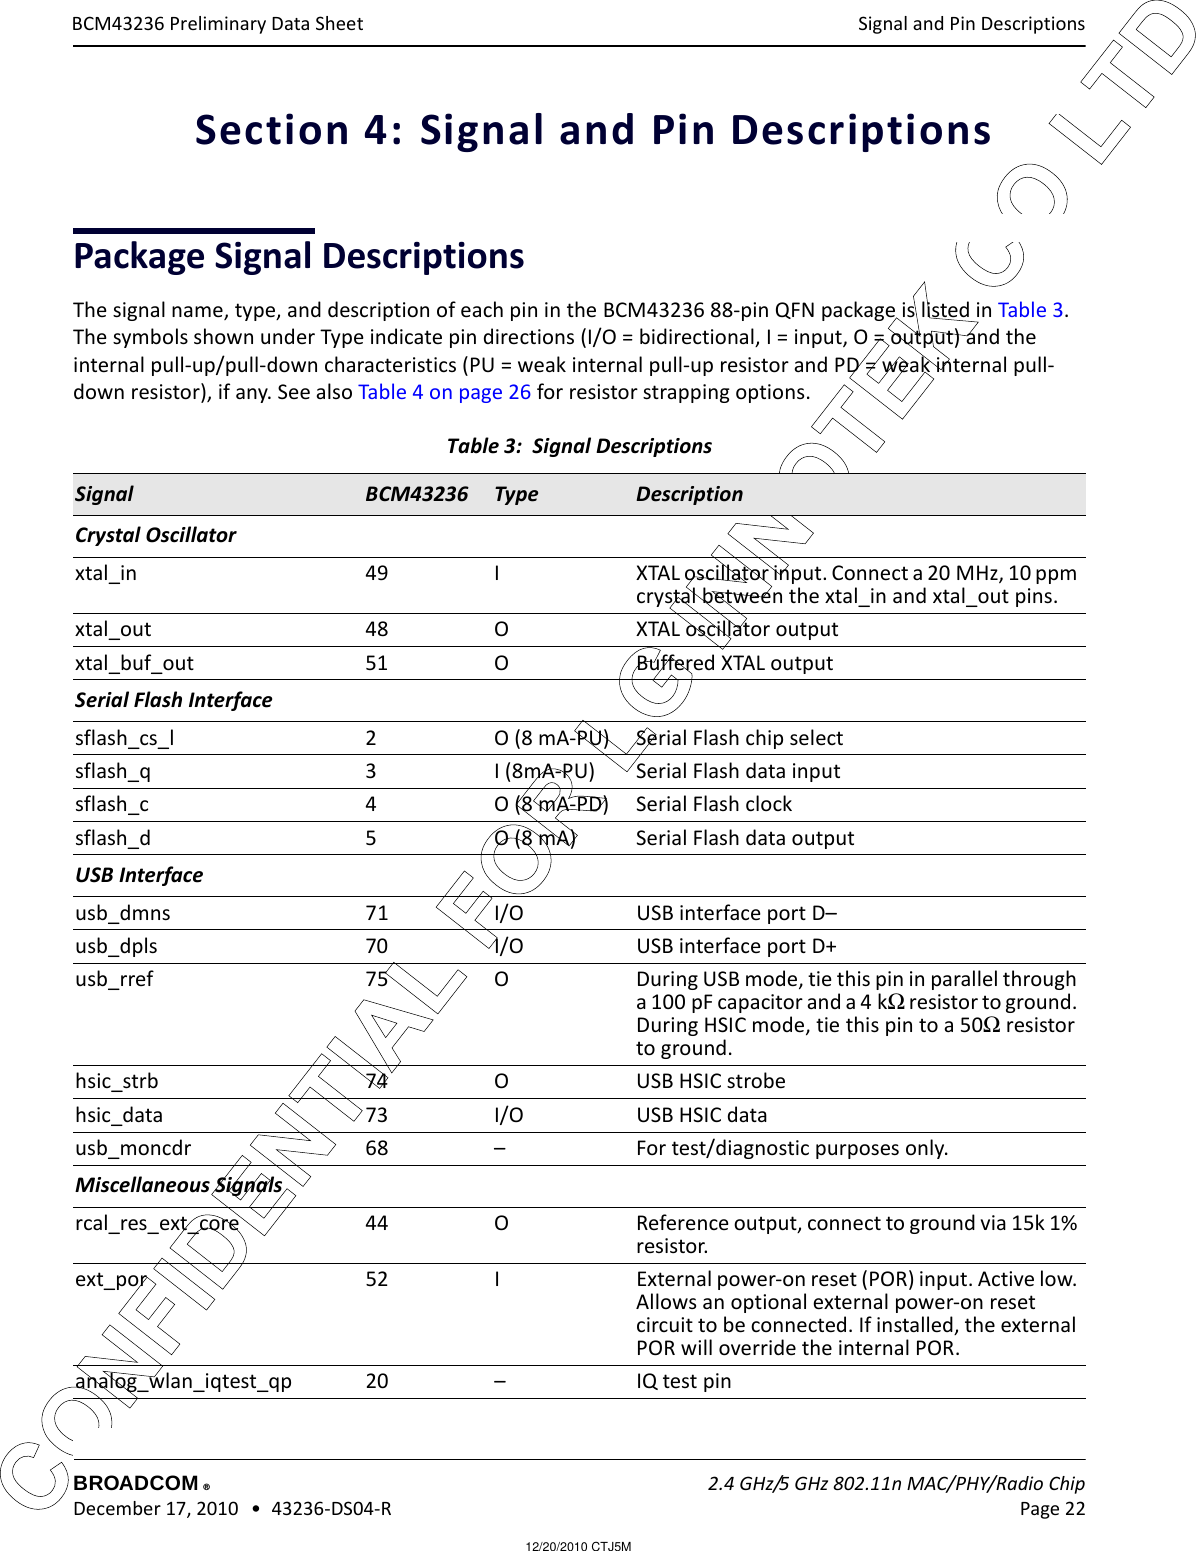 12/20/2010 CTJ5MCONFIDENTIAL FOR LG INNOTEK CO LTD Signal and Pin DescriptionsBROADCOM    2.4 GHz/5 GHz 802.11n MAC/PHY/Radio Chip December 17, 2010   •  43236-DS04-R Page 22®BCM43236 Preliminary Data SheetSection 4: Signal and Pin DescriptionsPackage Signal DescriptionsThe signal name, type, and description of each pin in the BCM43236 88-pin QFN package is listed in Table 3. The symbols shown under Type indicate pin directions (I/O = bidirectional, I = input, O = output) and the internal pull-up/pull-down characteristics (PU = weak internal pull-up resistor and PD = weak internal pull-down resistor), if any. See also Table 4 on page 26 for resistor strapping options.Table 3:  Signal Descriptions Signal BCM43236 Type DescriptionCrystal Oscillatorxtal_in 49 I XTAL oscillator input. Connect a 20 MHz, 10 ppm crystal between the xtal_in and xtal_out pins.xtal_out 48 O XTAL oscillator outputxtal_buf_out 51 O Buffered XTAL outputSerial Flash Interfacesflash_cs_l 2 O (8 mA-PU) Serial Flash chip selectsflash_q 3 I (8mA-PU) Serial Flash data inputsflash_c 4 O (8 mA-PD) Serial Flash clocksflash_d 5 O (8 mA) Serial Flash data outputUSB Interfaceusb_dmns 71 I/O USB interface port D–usb_dpls 70 I/O USB interface port D+usb_rref 75 O During USB mode, tie this pin in parallel through a 100 pF capacitor and a 4 kΩ resistor to ground. During HSIC mode, tie this pin to a 50Ω resistor to ground.hsic_strb 74 O USB HSIC strobehsic_data 73 I/O USB HSIC datausb_moncdr 68 – For test/diagnostic purposes only.Miscellaneous Signalsrcal_res_ext_core 44 O Reference output, connect to ground via 15k 1% resistor.ext_por 52 I External power-on reset (POR) input. Active low. Allows an optional external power-on reset circuit to be connected. If installed, the external POR will override the internal POR.analog_wlan_iqtest_qp 20 – IQ test pin